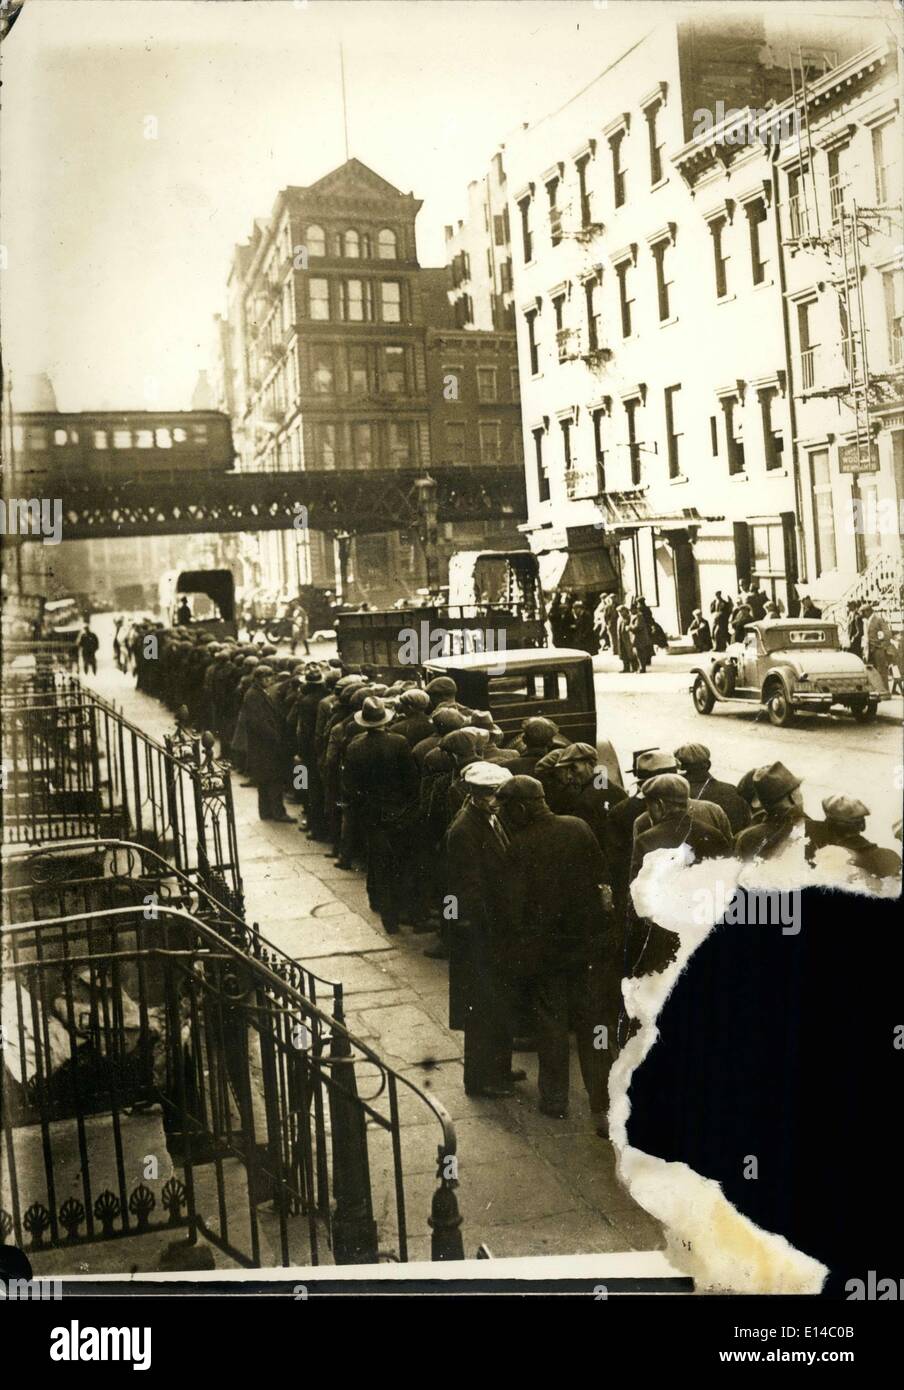 Apr. 17, 2012 - Great Depression- Food line for New York unemployed. Stock Photo